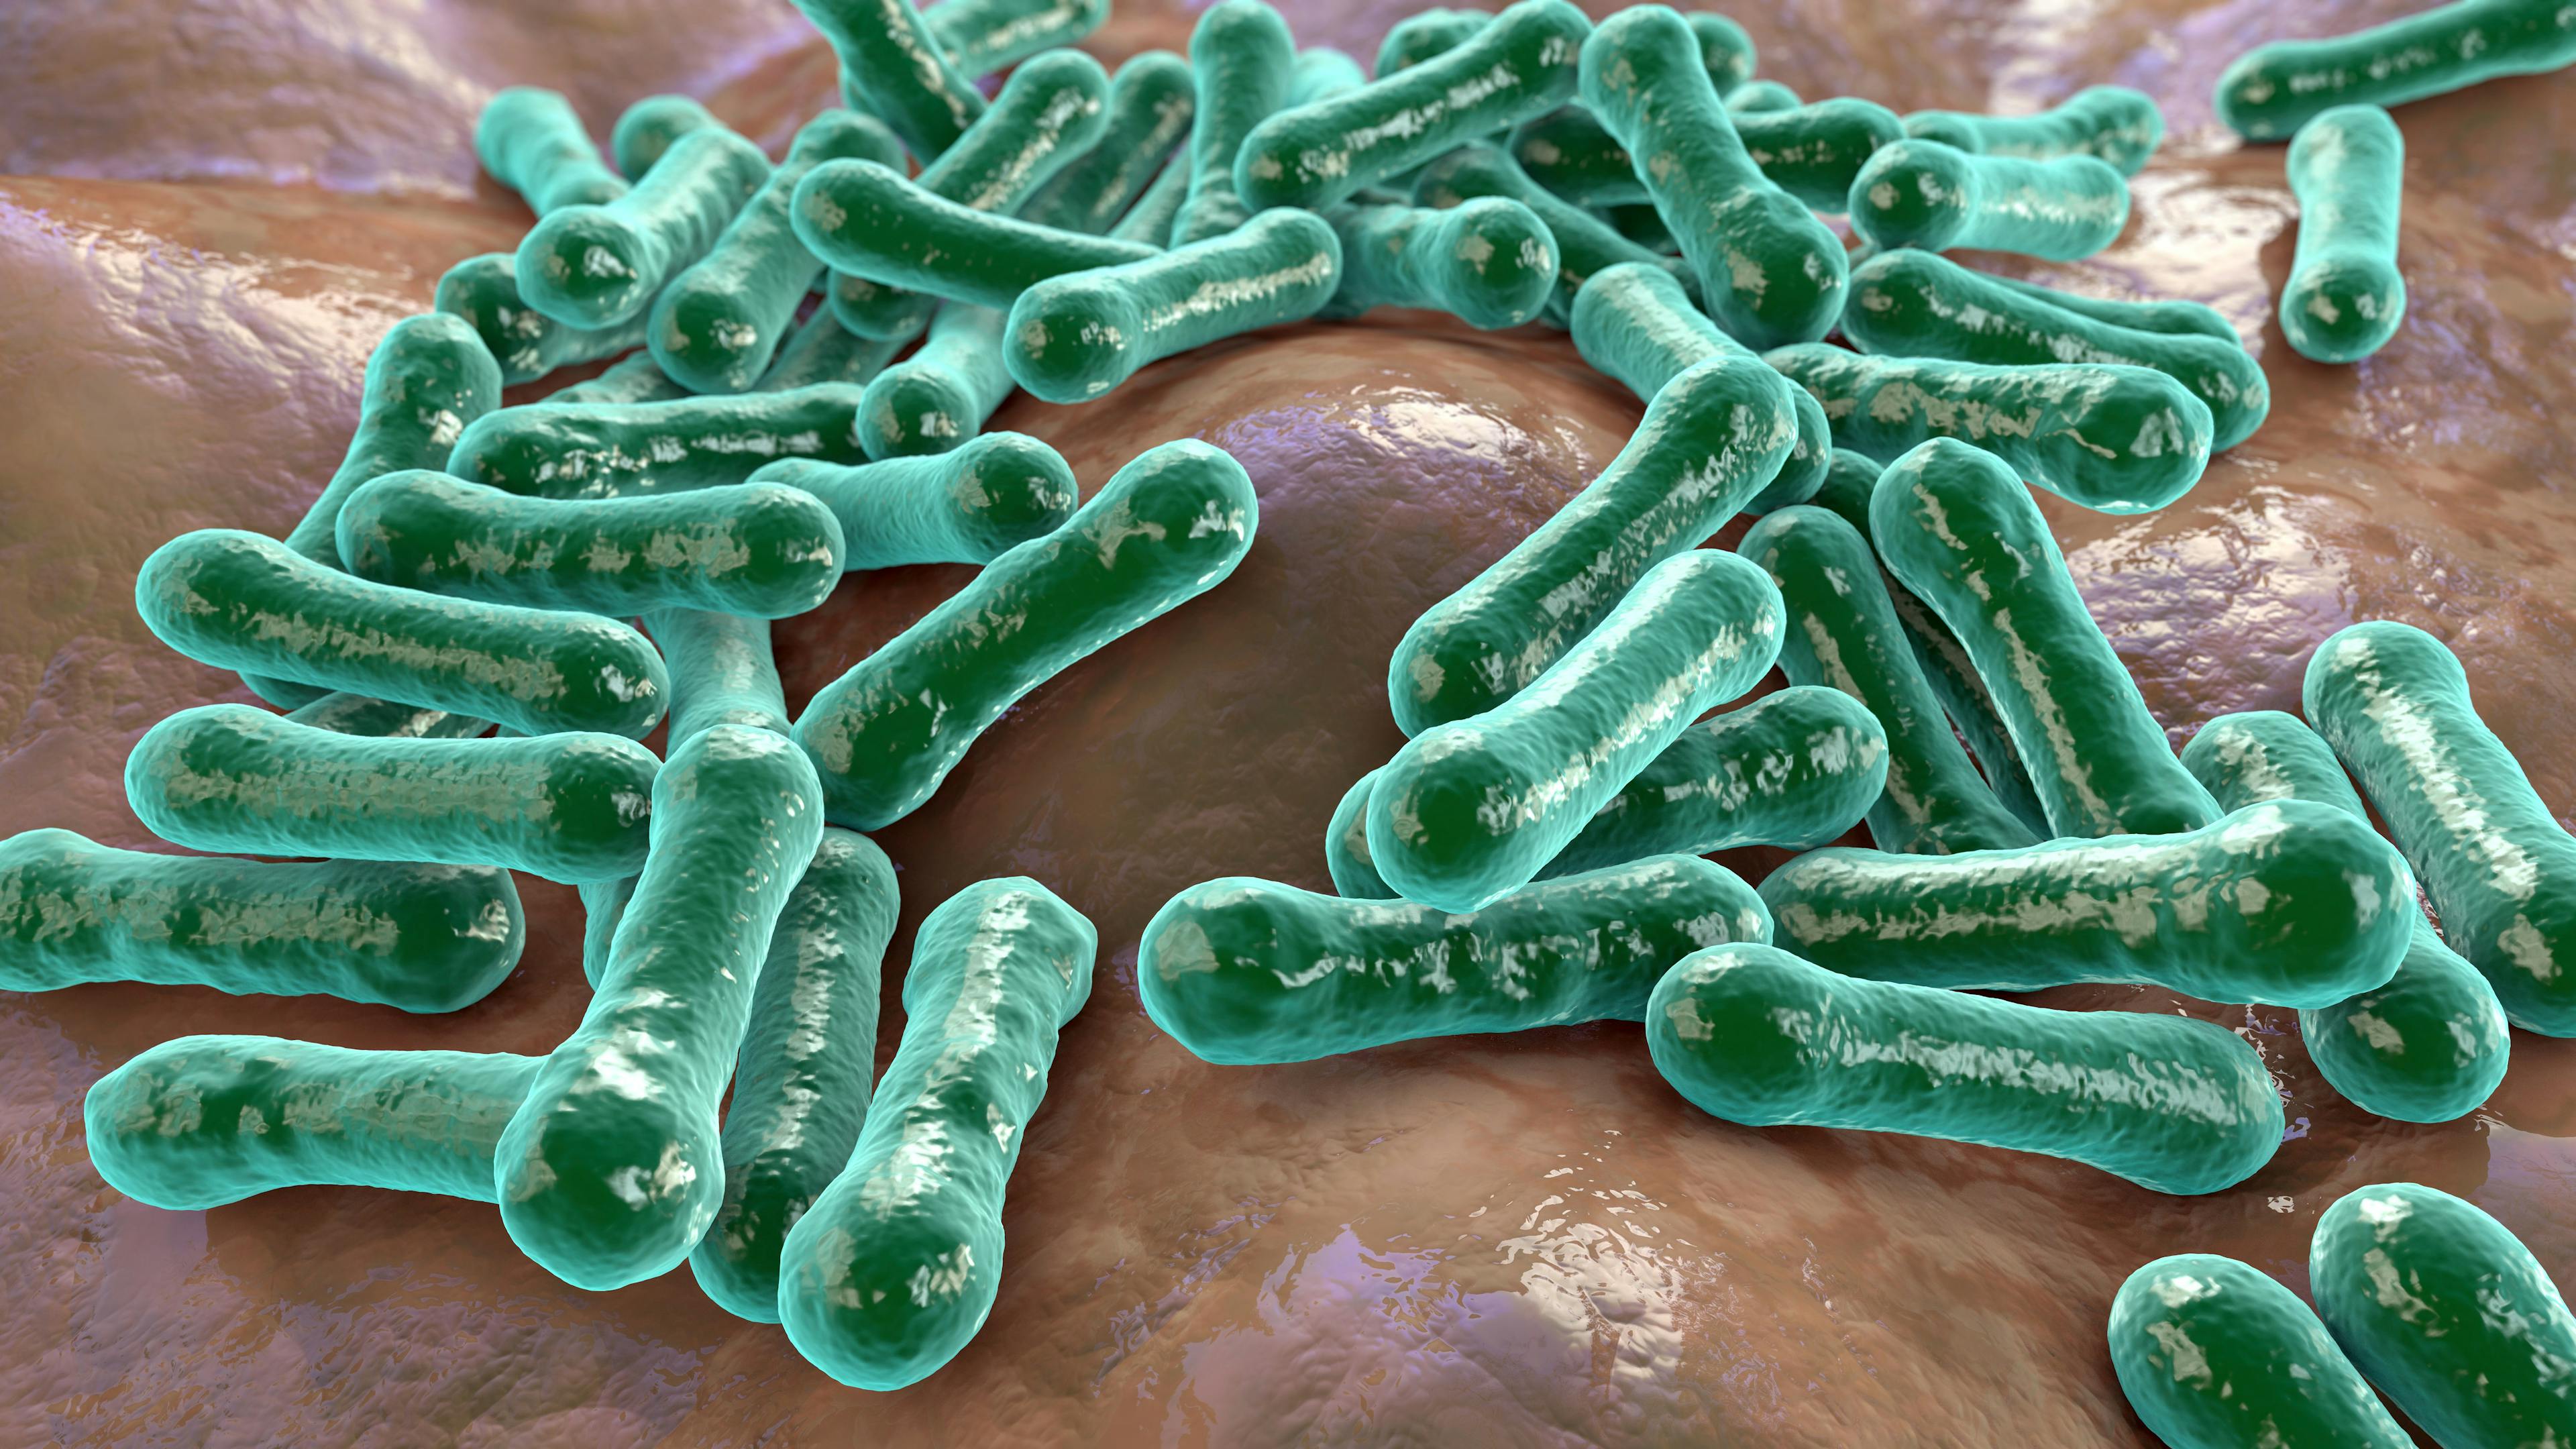 Clostridioides difficile infection | Image Credit: Dr_Microbe - stock.adobe.com